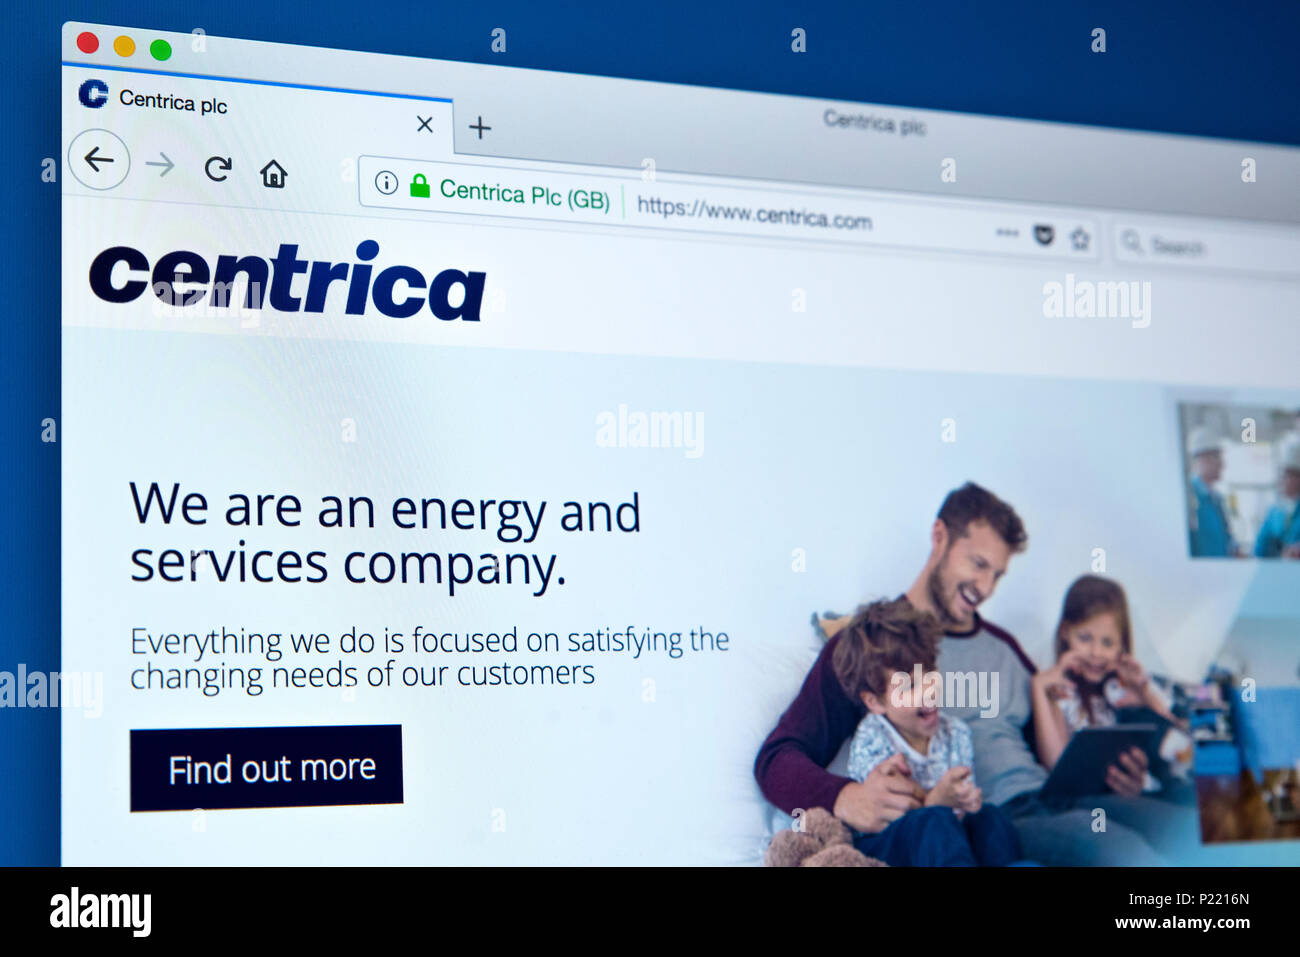 LONDON, UK - FEBRUARY 24TH 2018: The homepage of the official website for Centrica plc - the British multinational utility company, on 24th February 2 Stock Photo